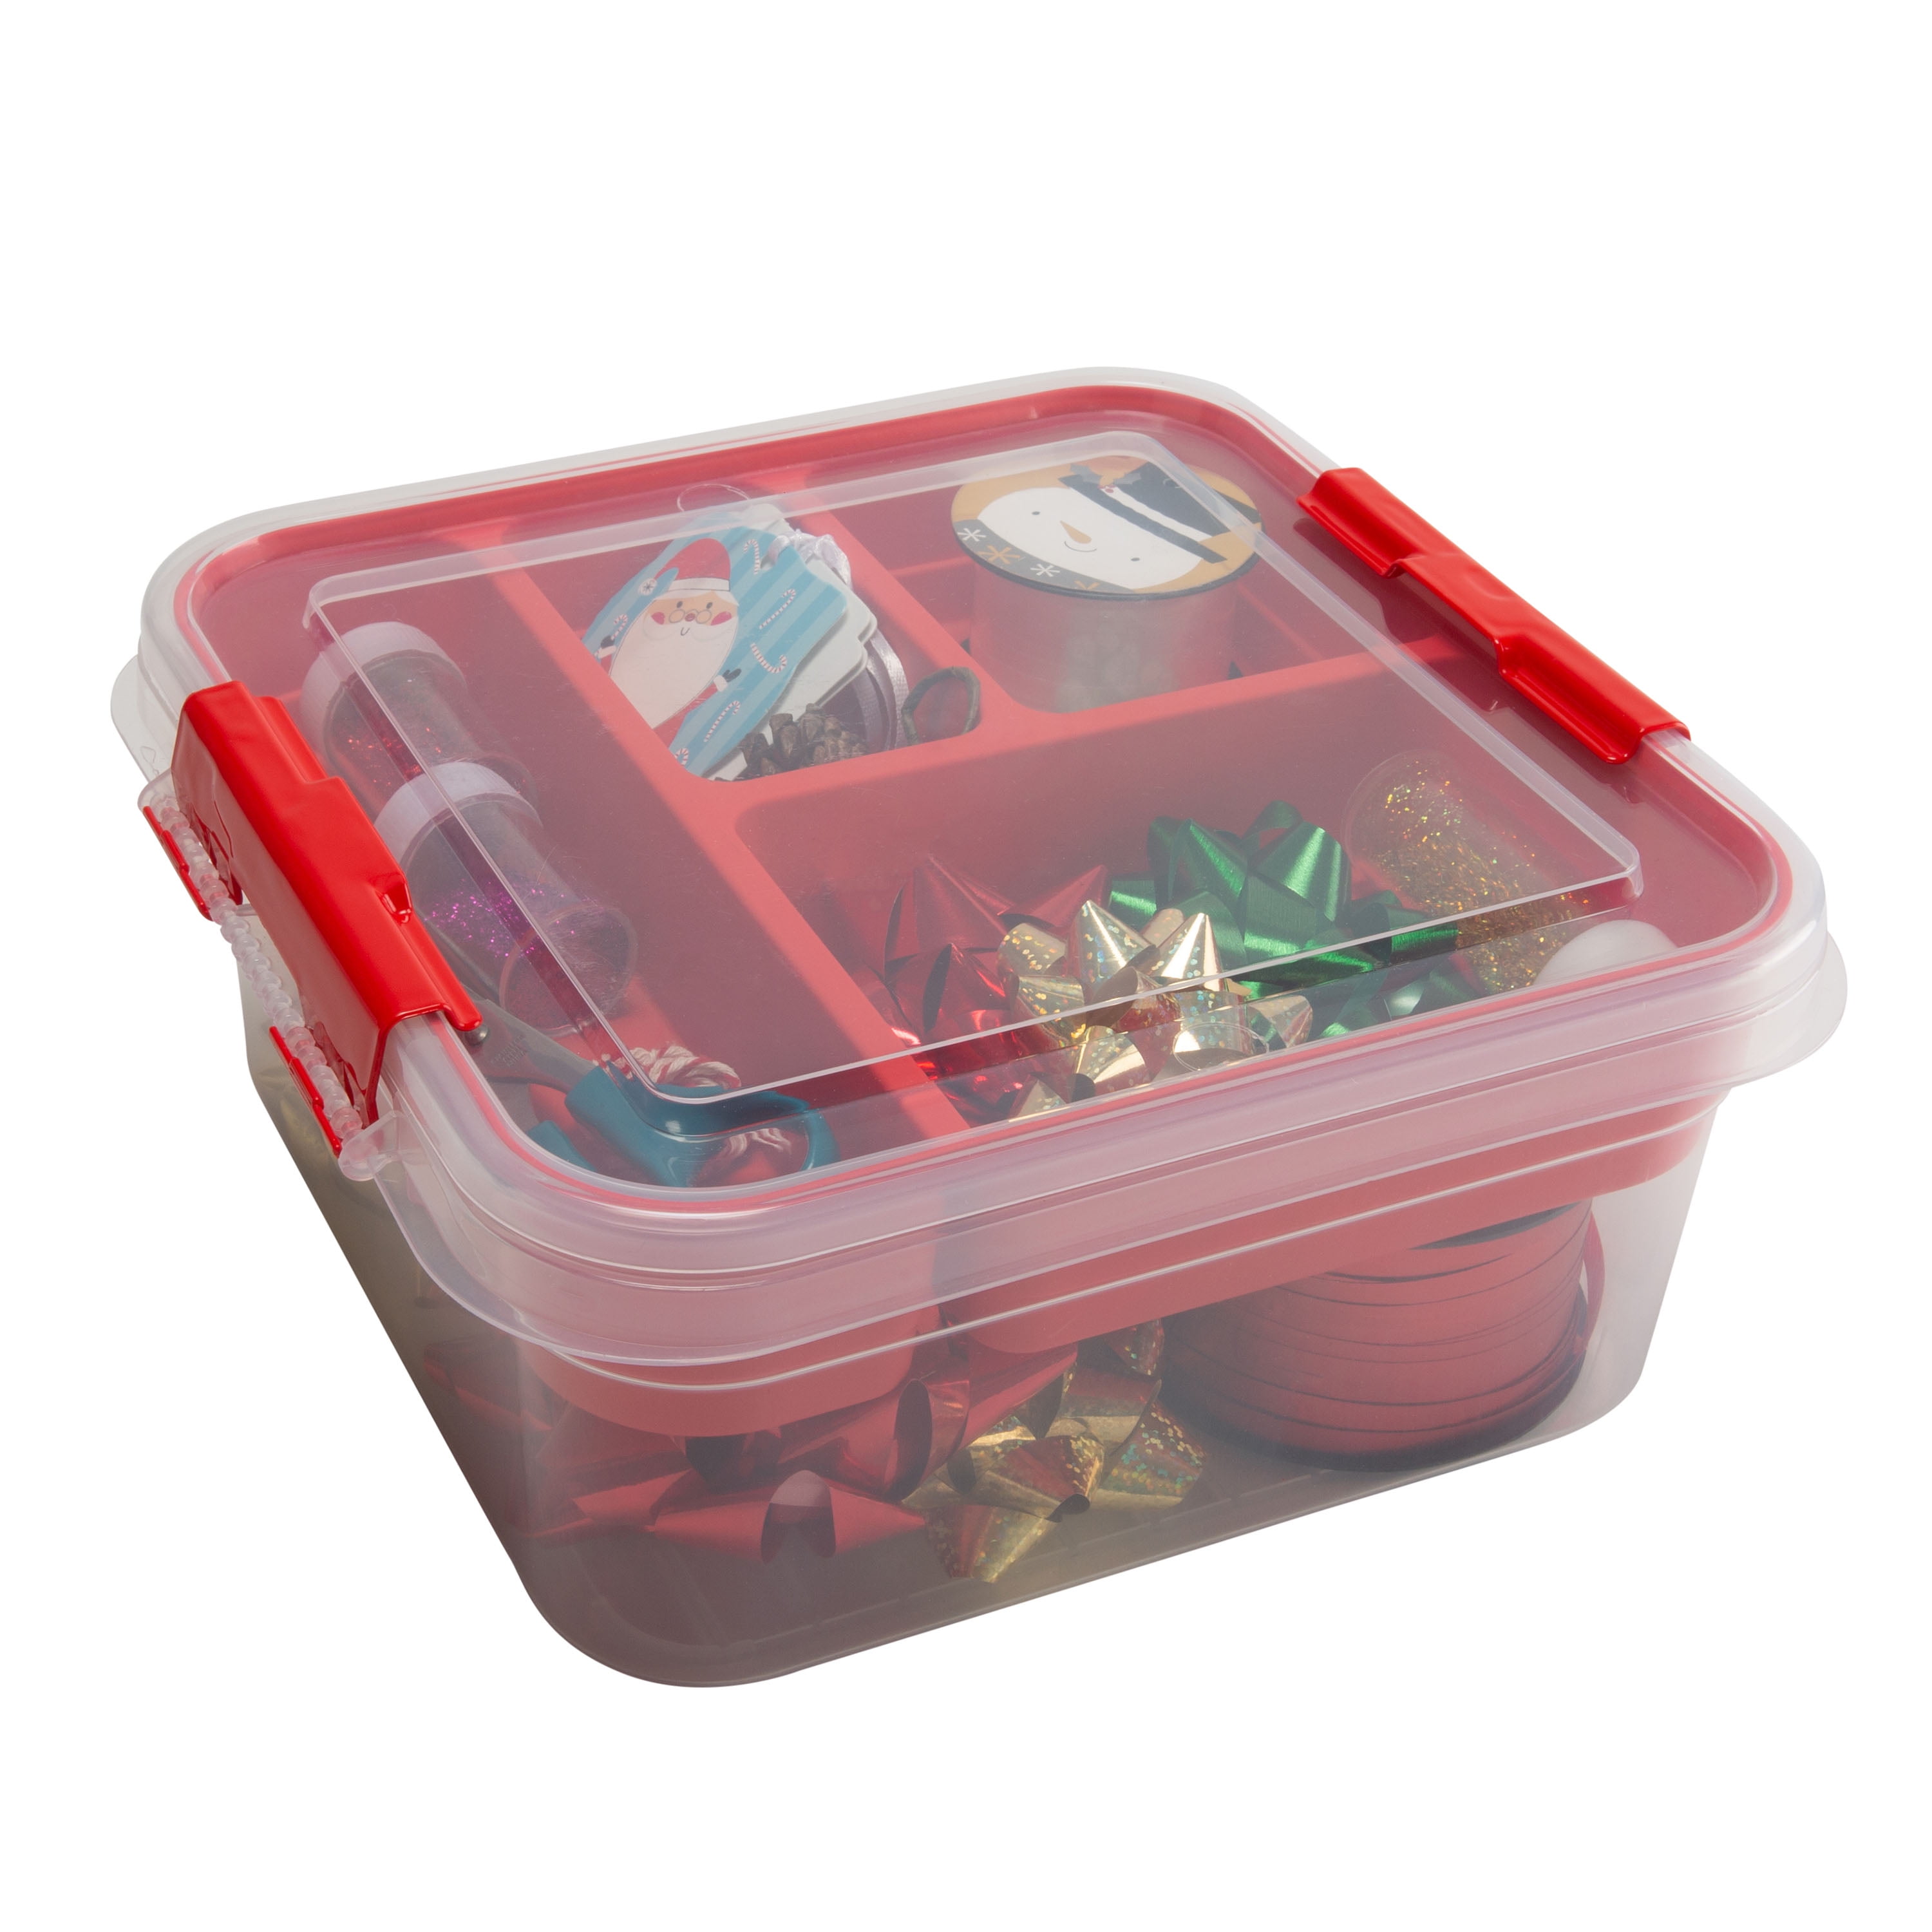 Simplify 5 Compartment Gift Supply, Red Iris Ribbon Storage Box Dispensers